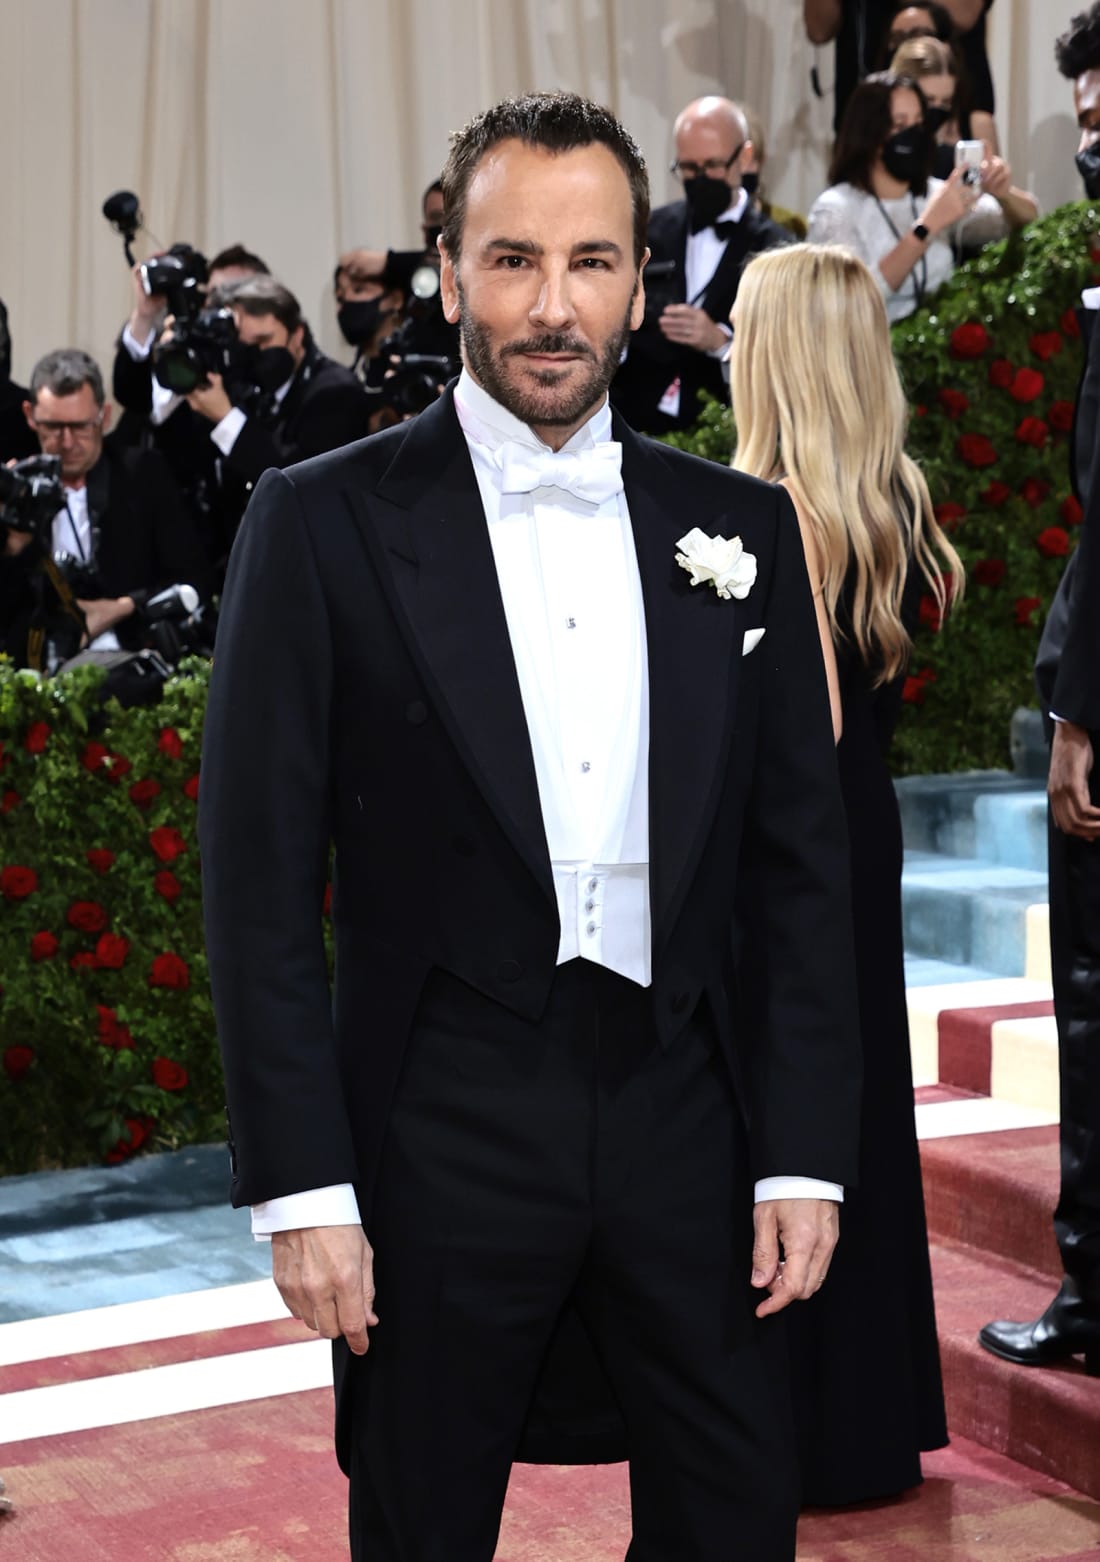 Designer Tom Ford naturally wore an outfit by his own brand, choosing a white-tie suit for the event. 